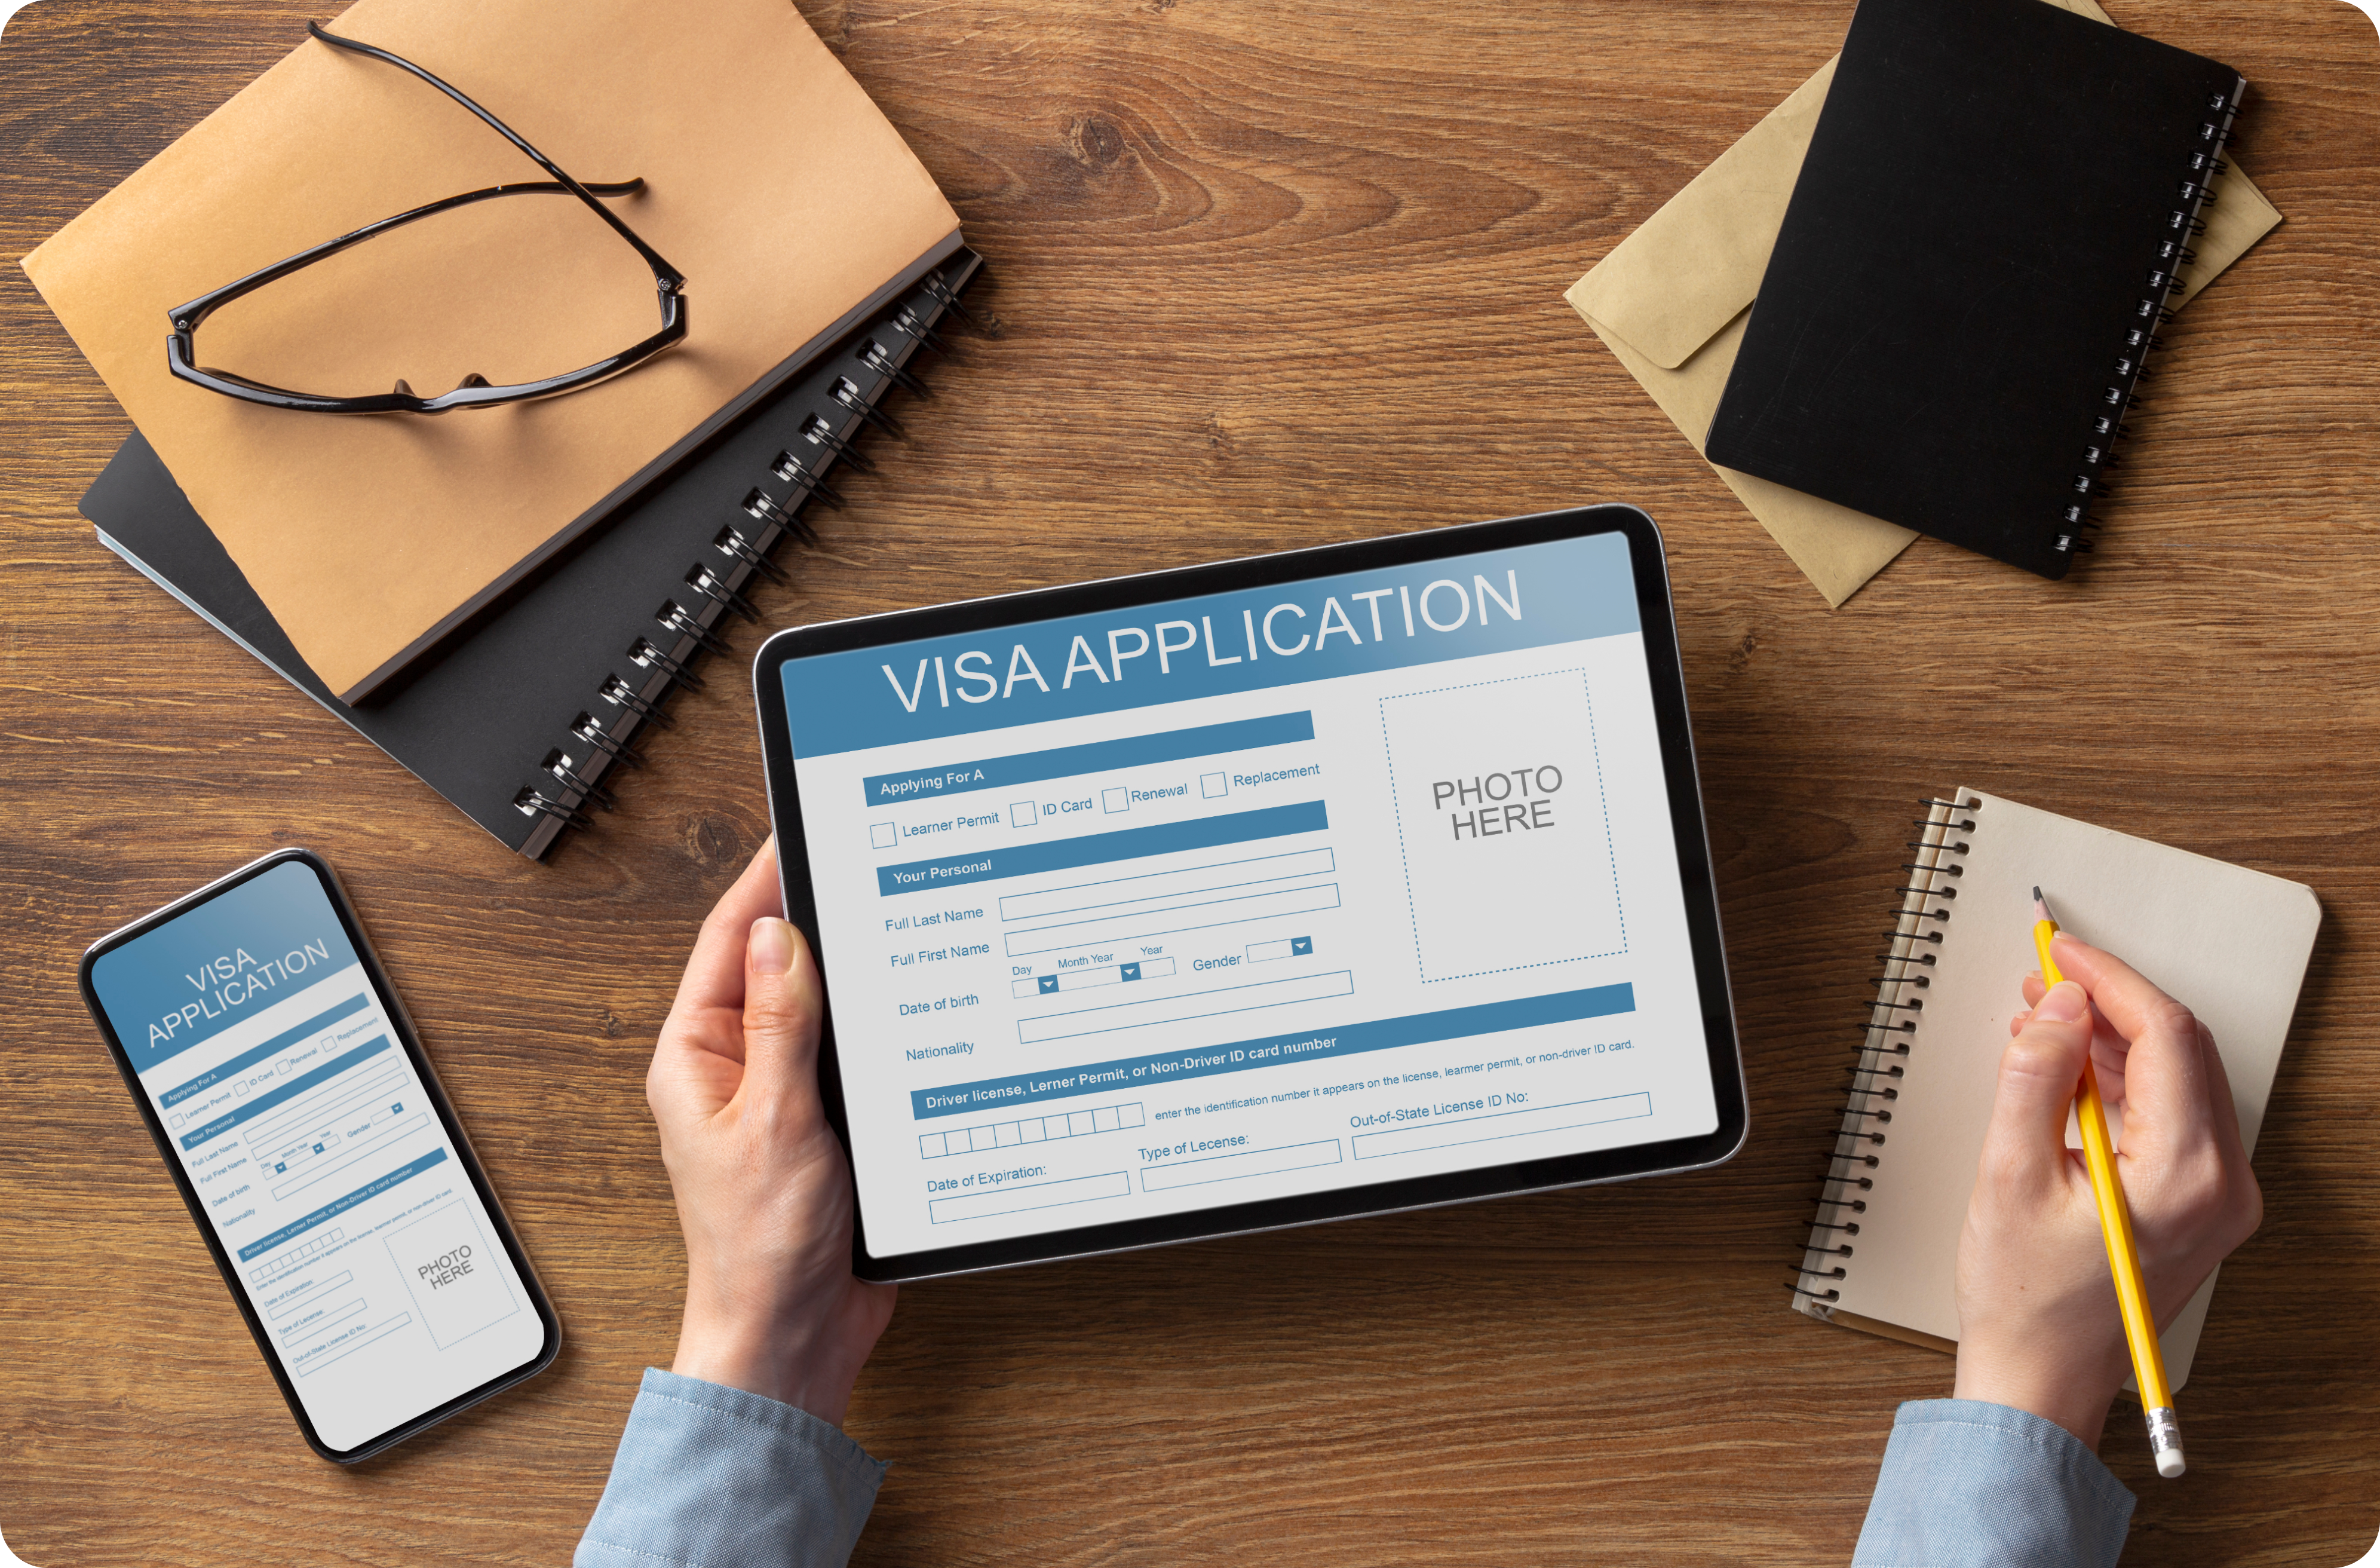 A visa application form open in a tablet a mobile phone